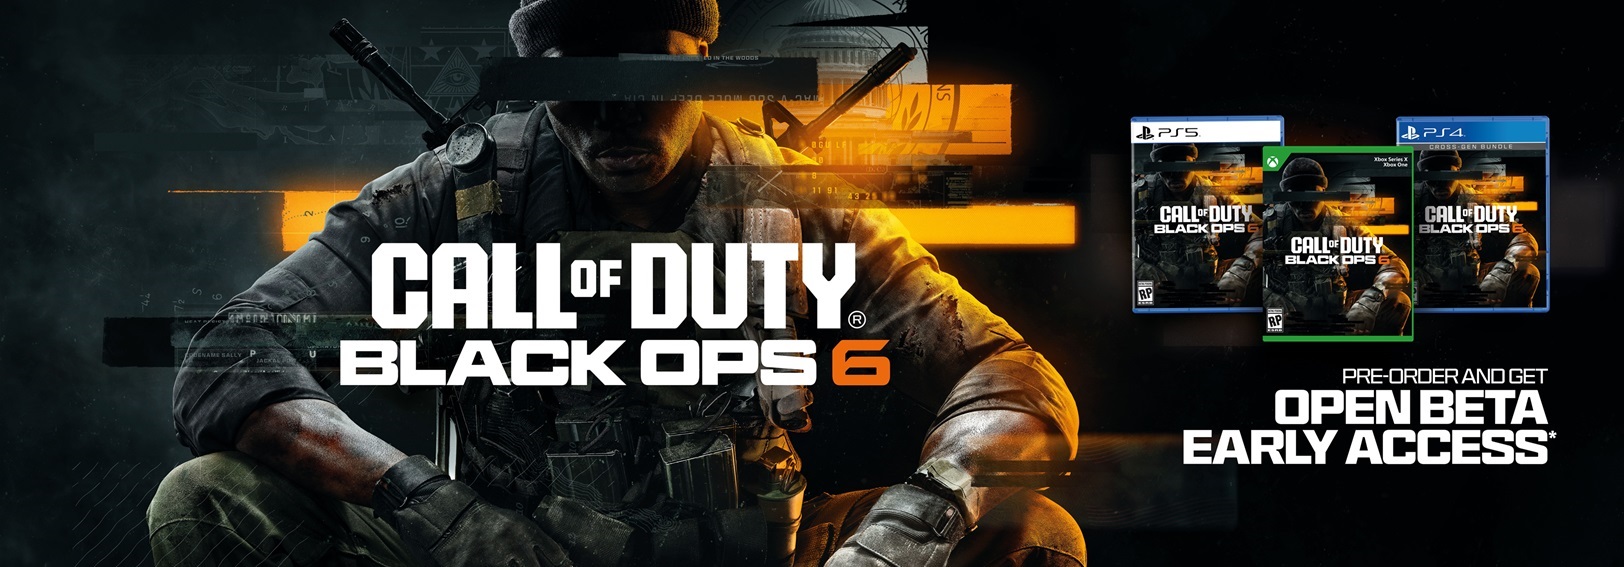 Call of Duty: Black Ops 6 pre-order